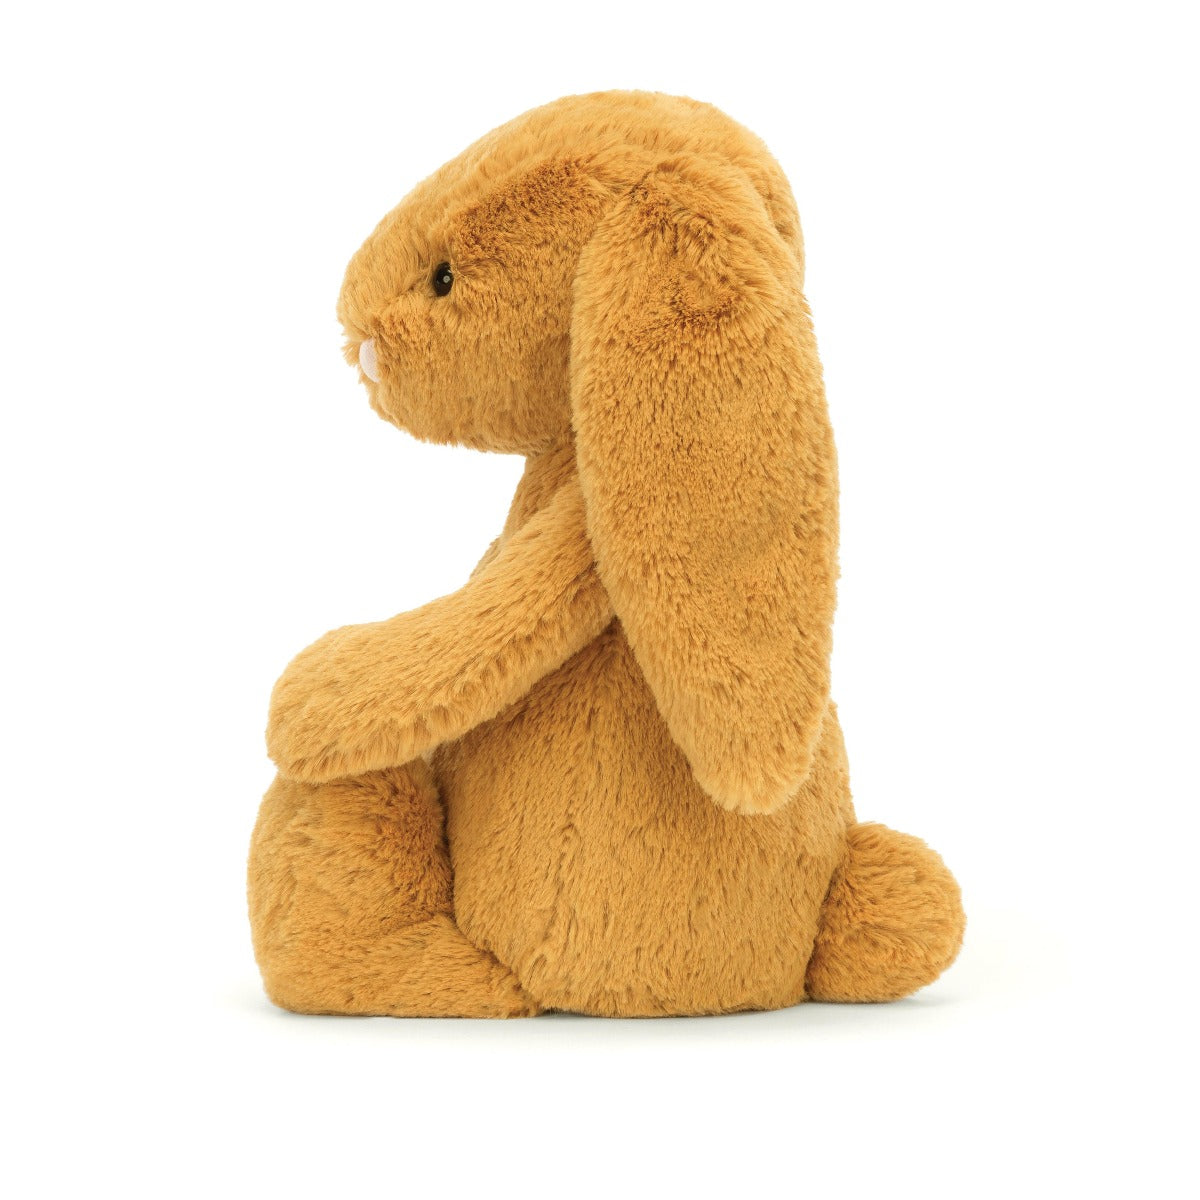 Jellycat bunny - angus and dudley